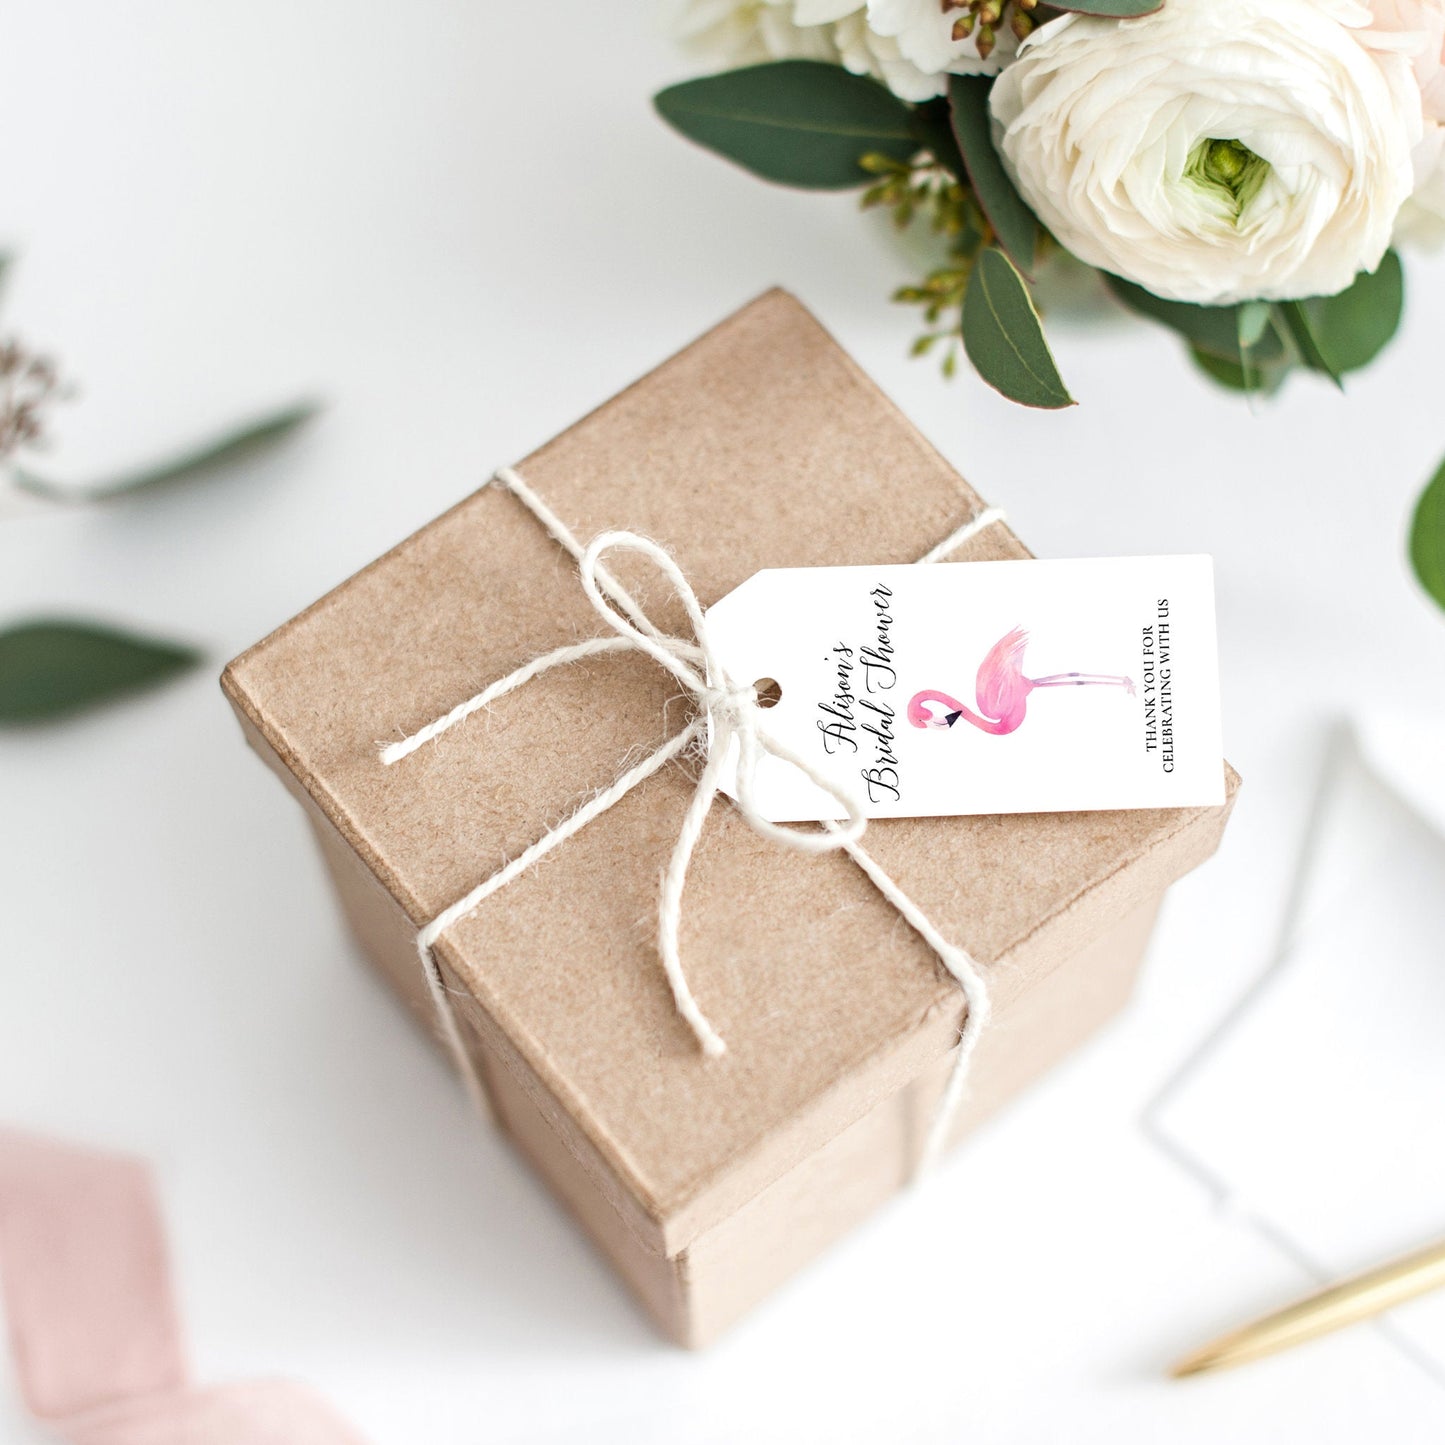 Lux Party’s white flamingo bridal shower favor tag with black lettering, tied to a brown kraft favor box.